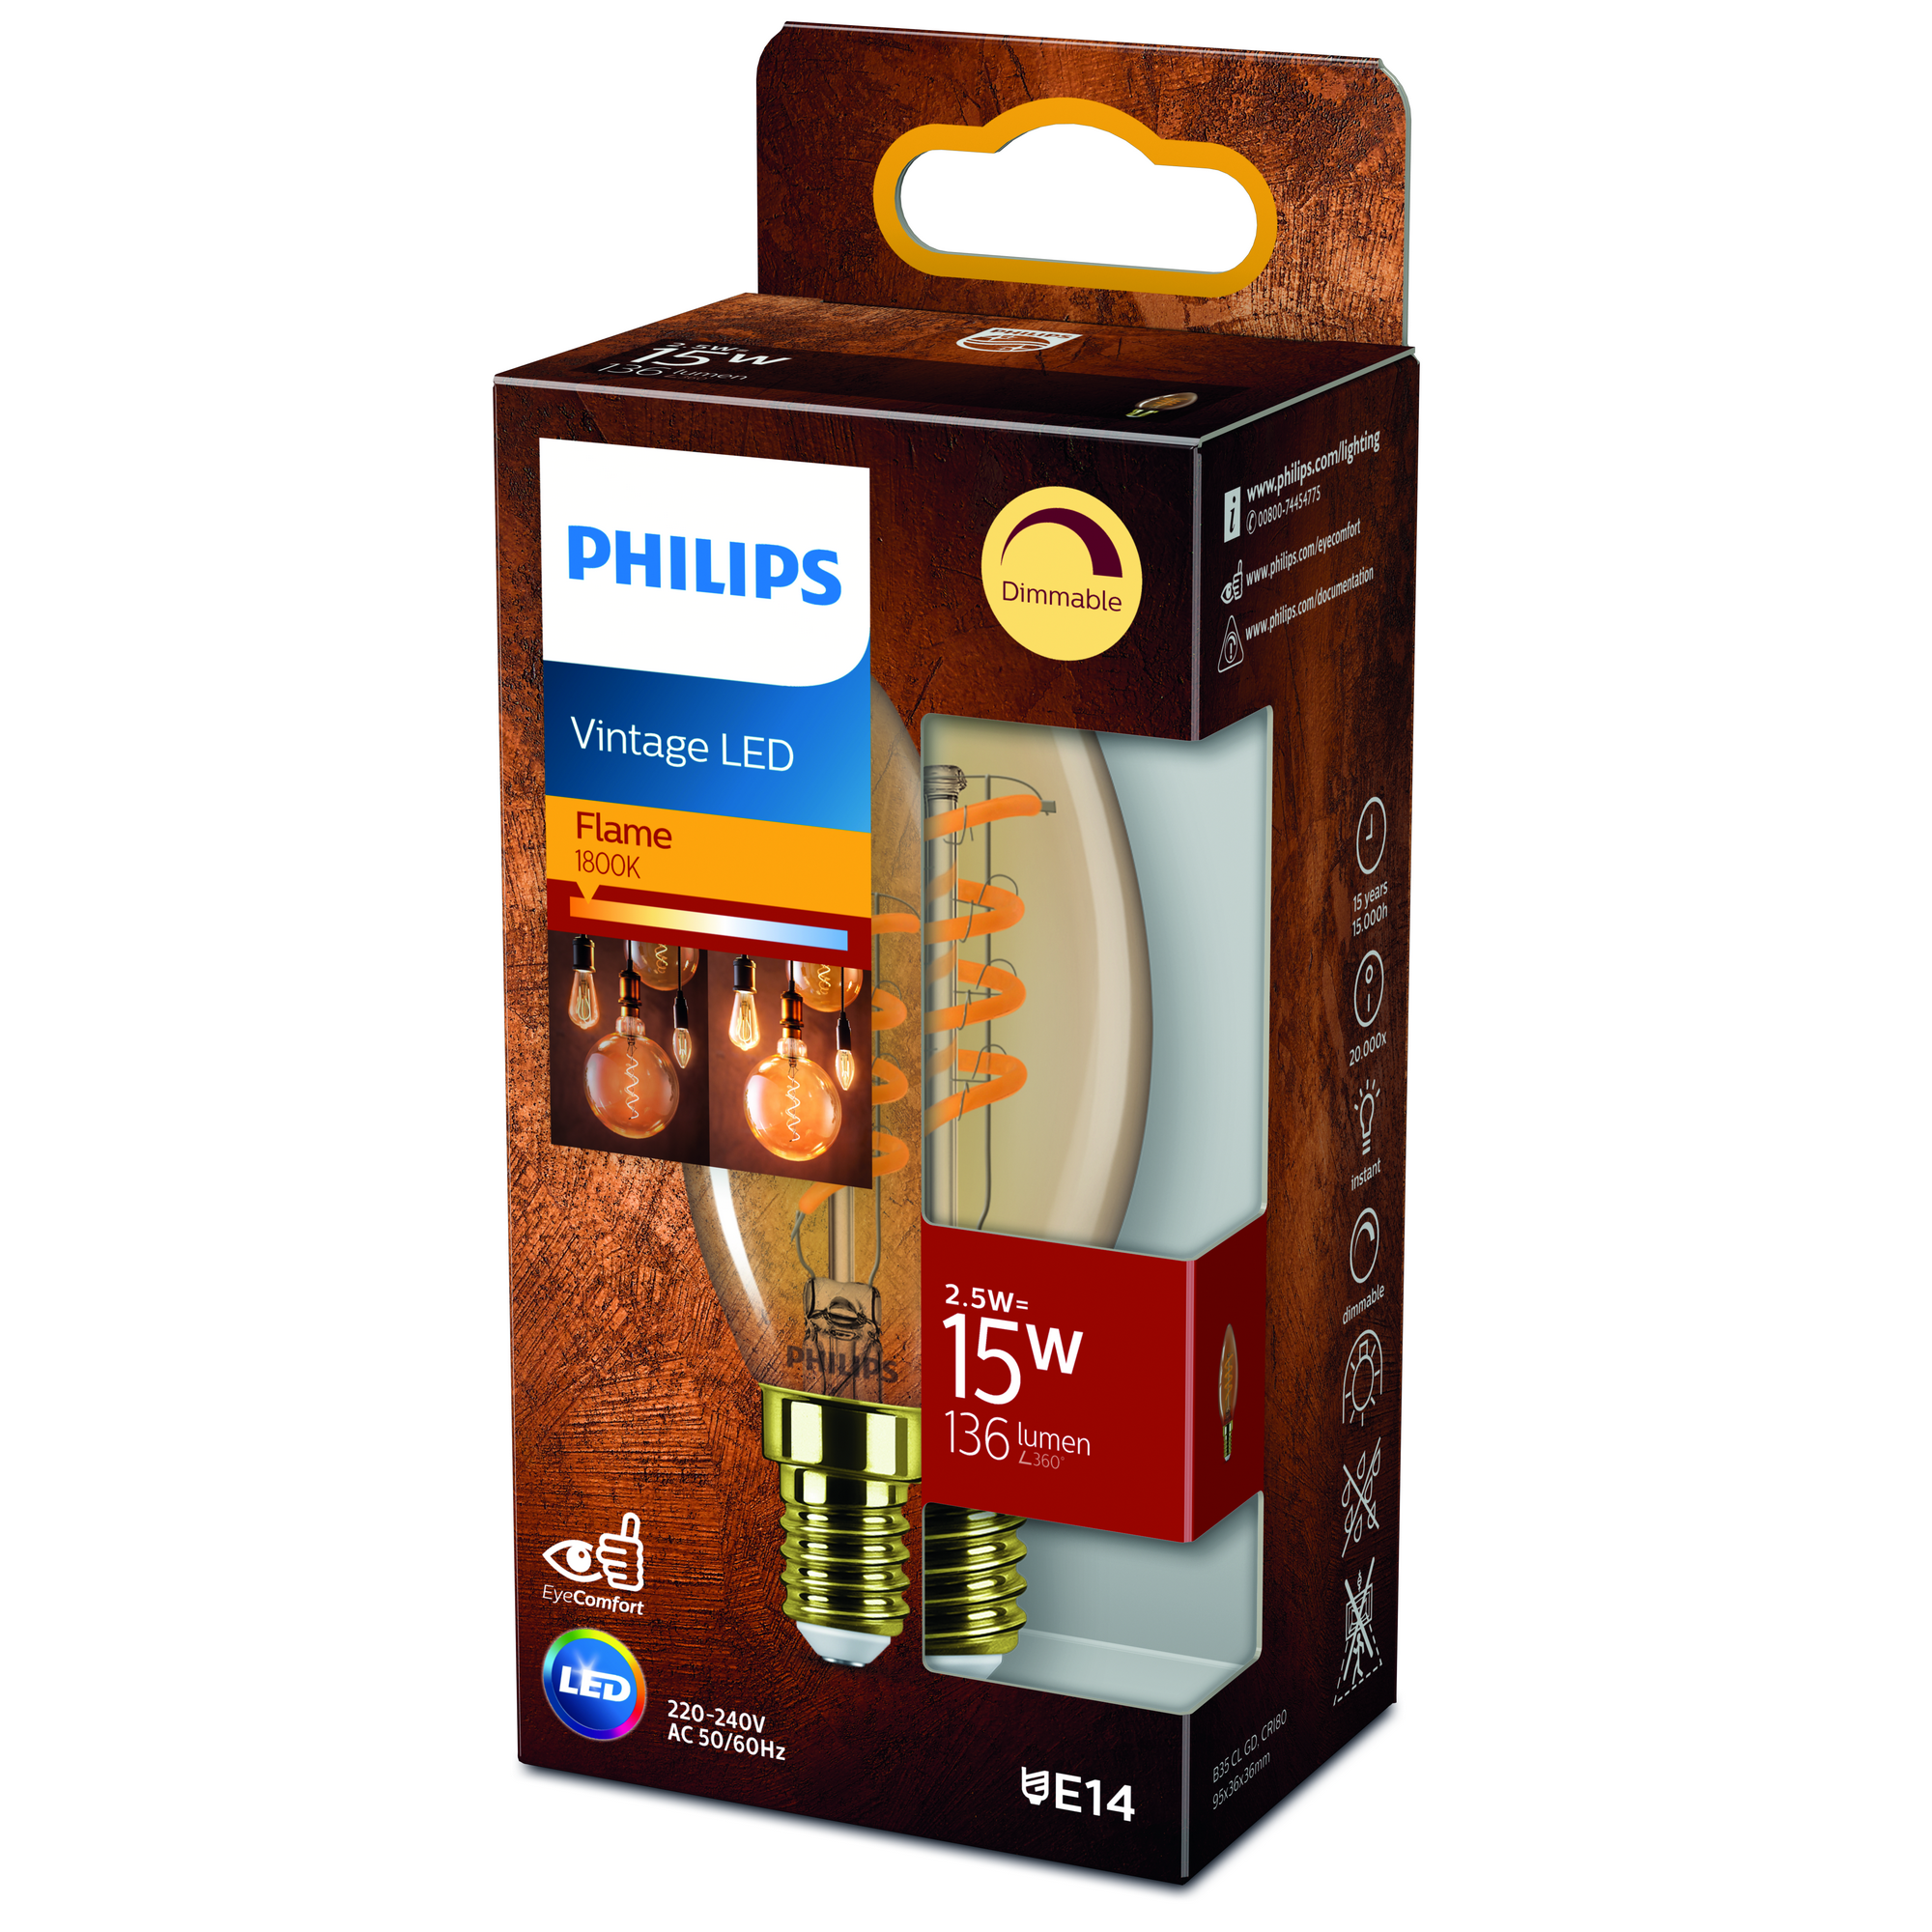 LED-Kerzenlampe 'Vintage' Gold E14 3,5 W, dimmbar + product picture